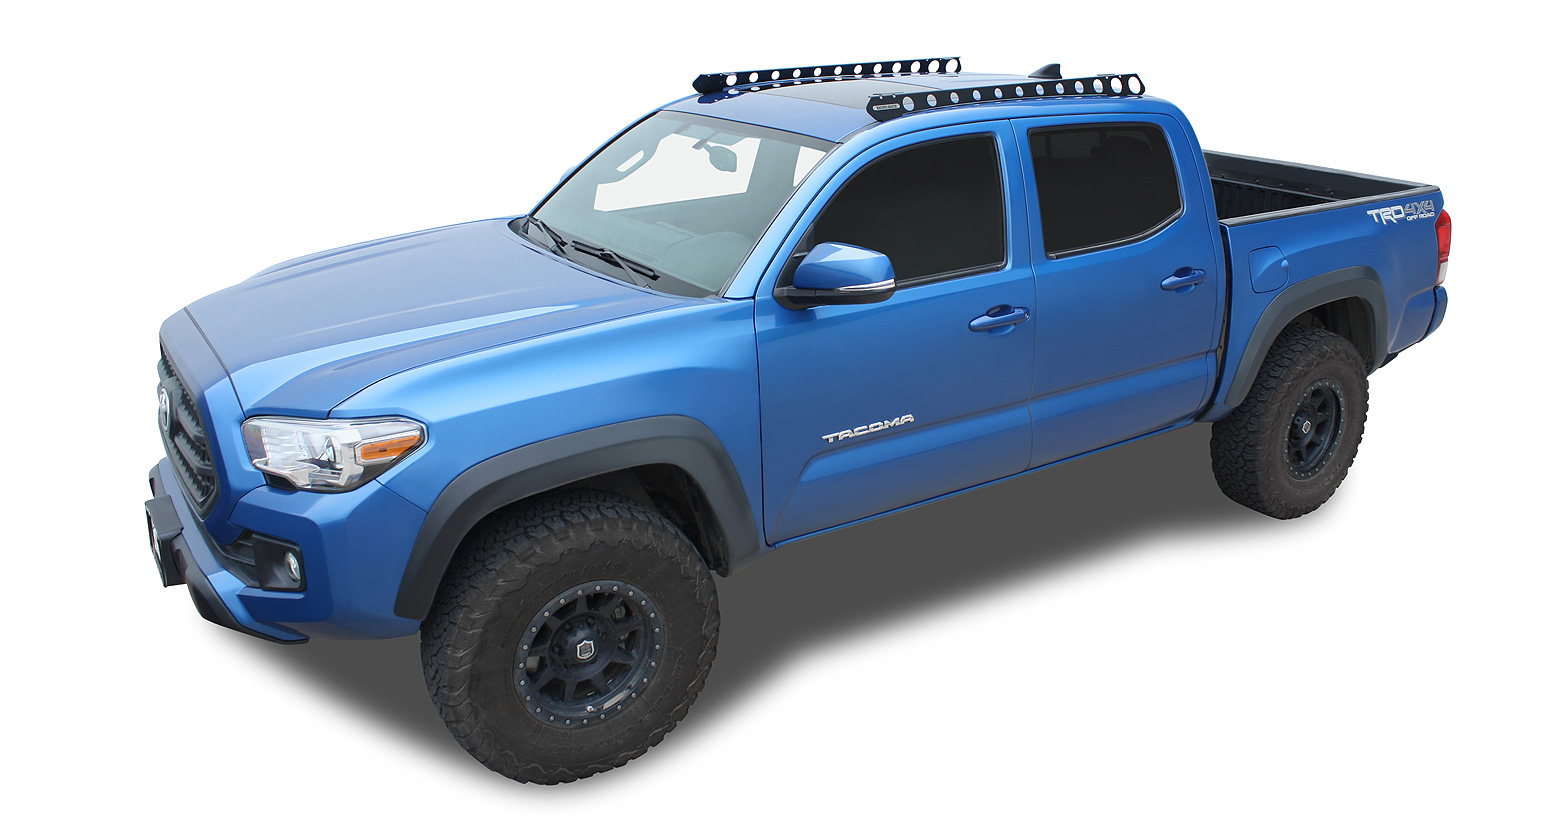 Rhino-Rack Pioneer Platform (60" x 49") Unassembled with Backbone 2016-2022 Tacoma DOUBLE CAB - Click Image to Close